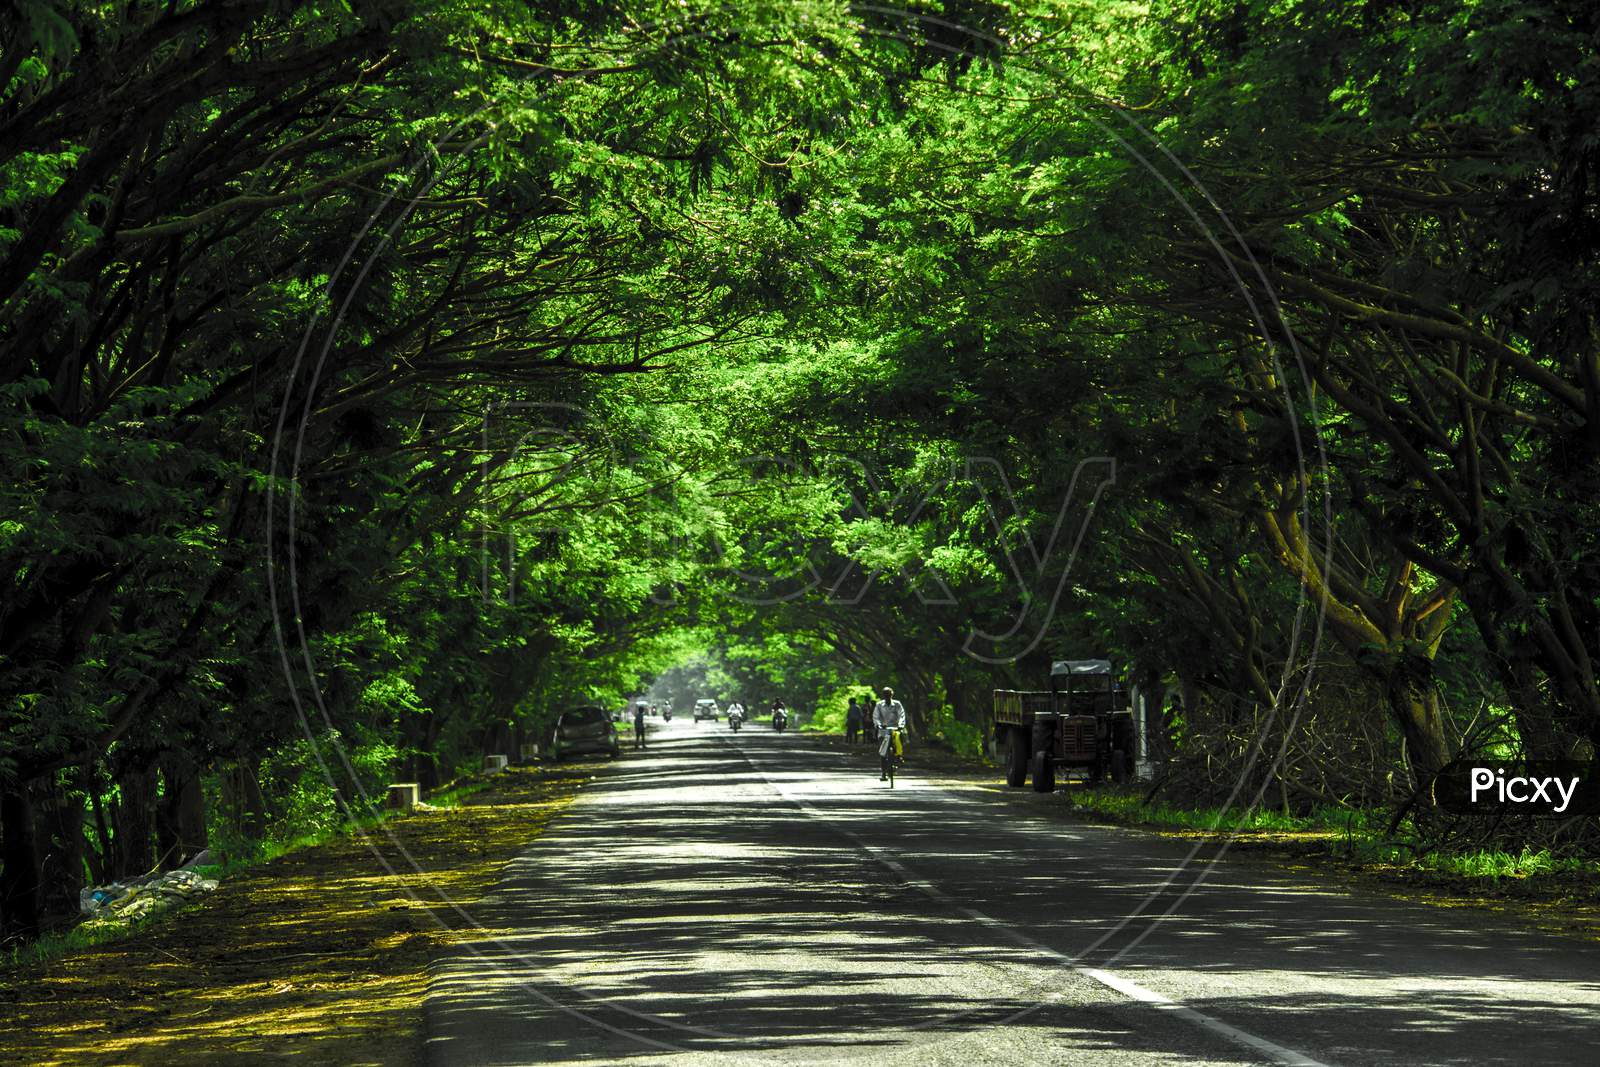 Canopy Of Green Tree Branches Over Rural Village Roads